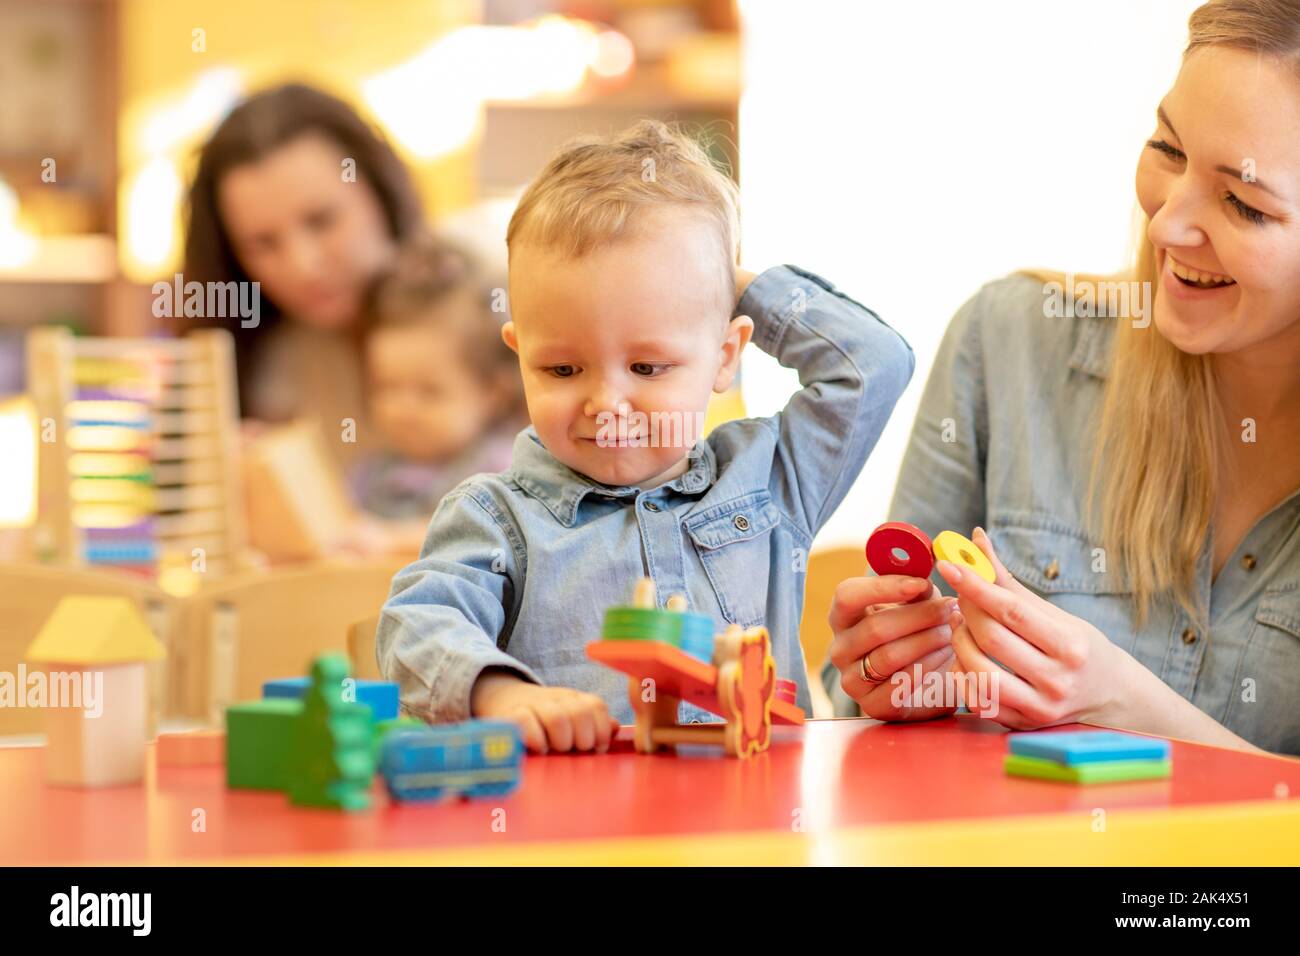 Children kids play with educational toys, arranging and sorting colors and shapes. Learning through experience conception. Stock Photo